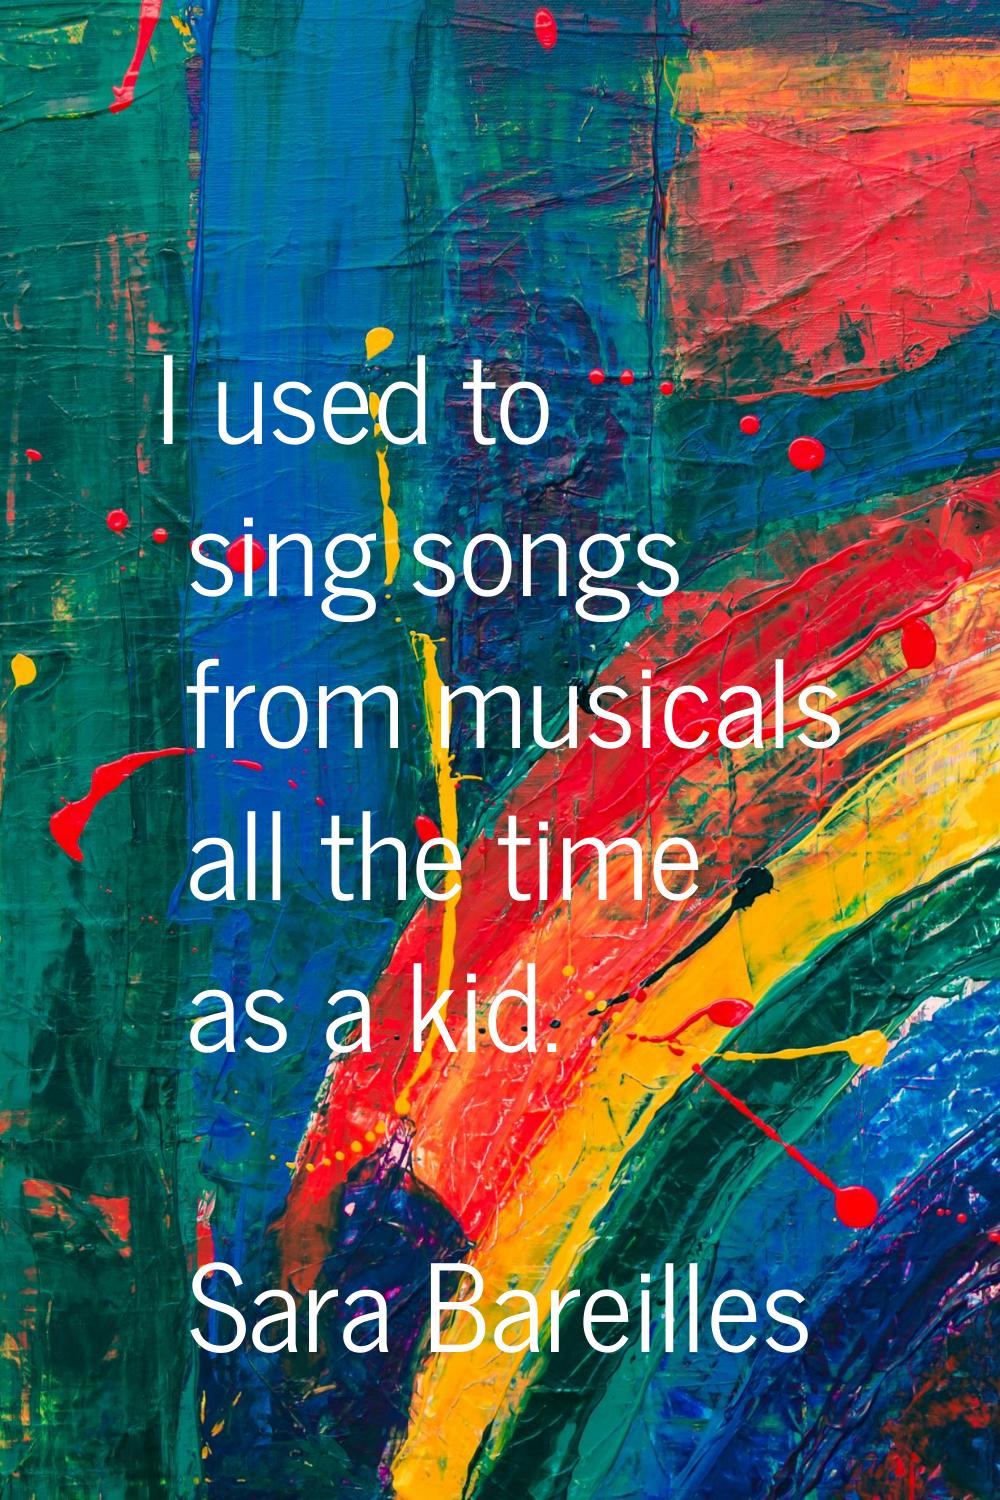 I used to sing songs from musicals all the time as a kid.